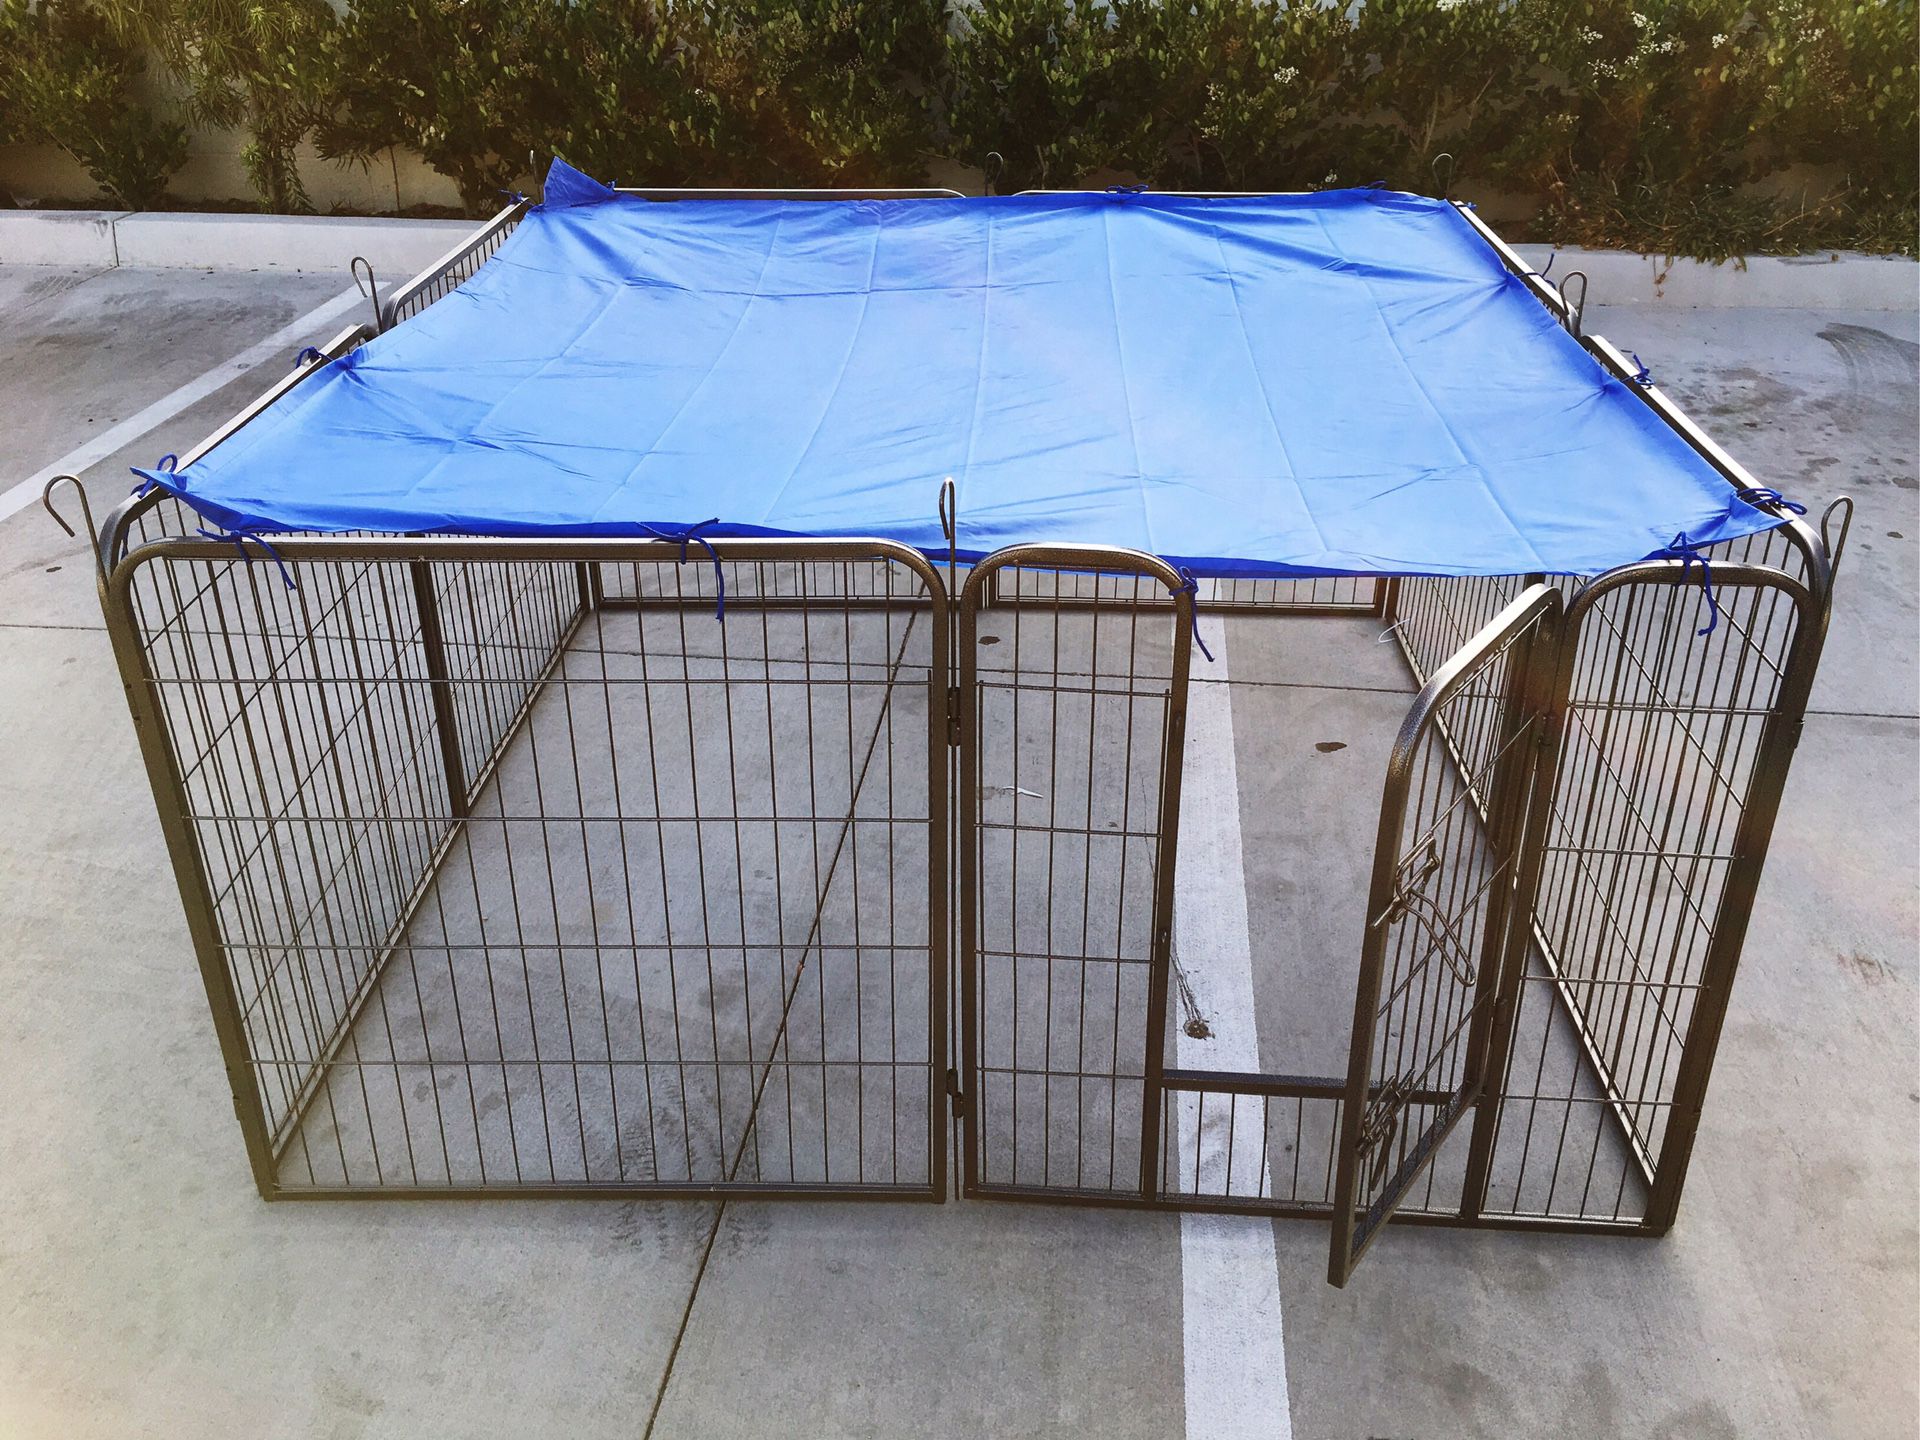 Brand new 32 inch tall x 32 inches wide each panel x 8 panels heavy duty exercise playpen with sun shade tarp cover fence safety gate dog cage crate